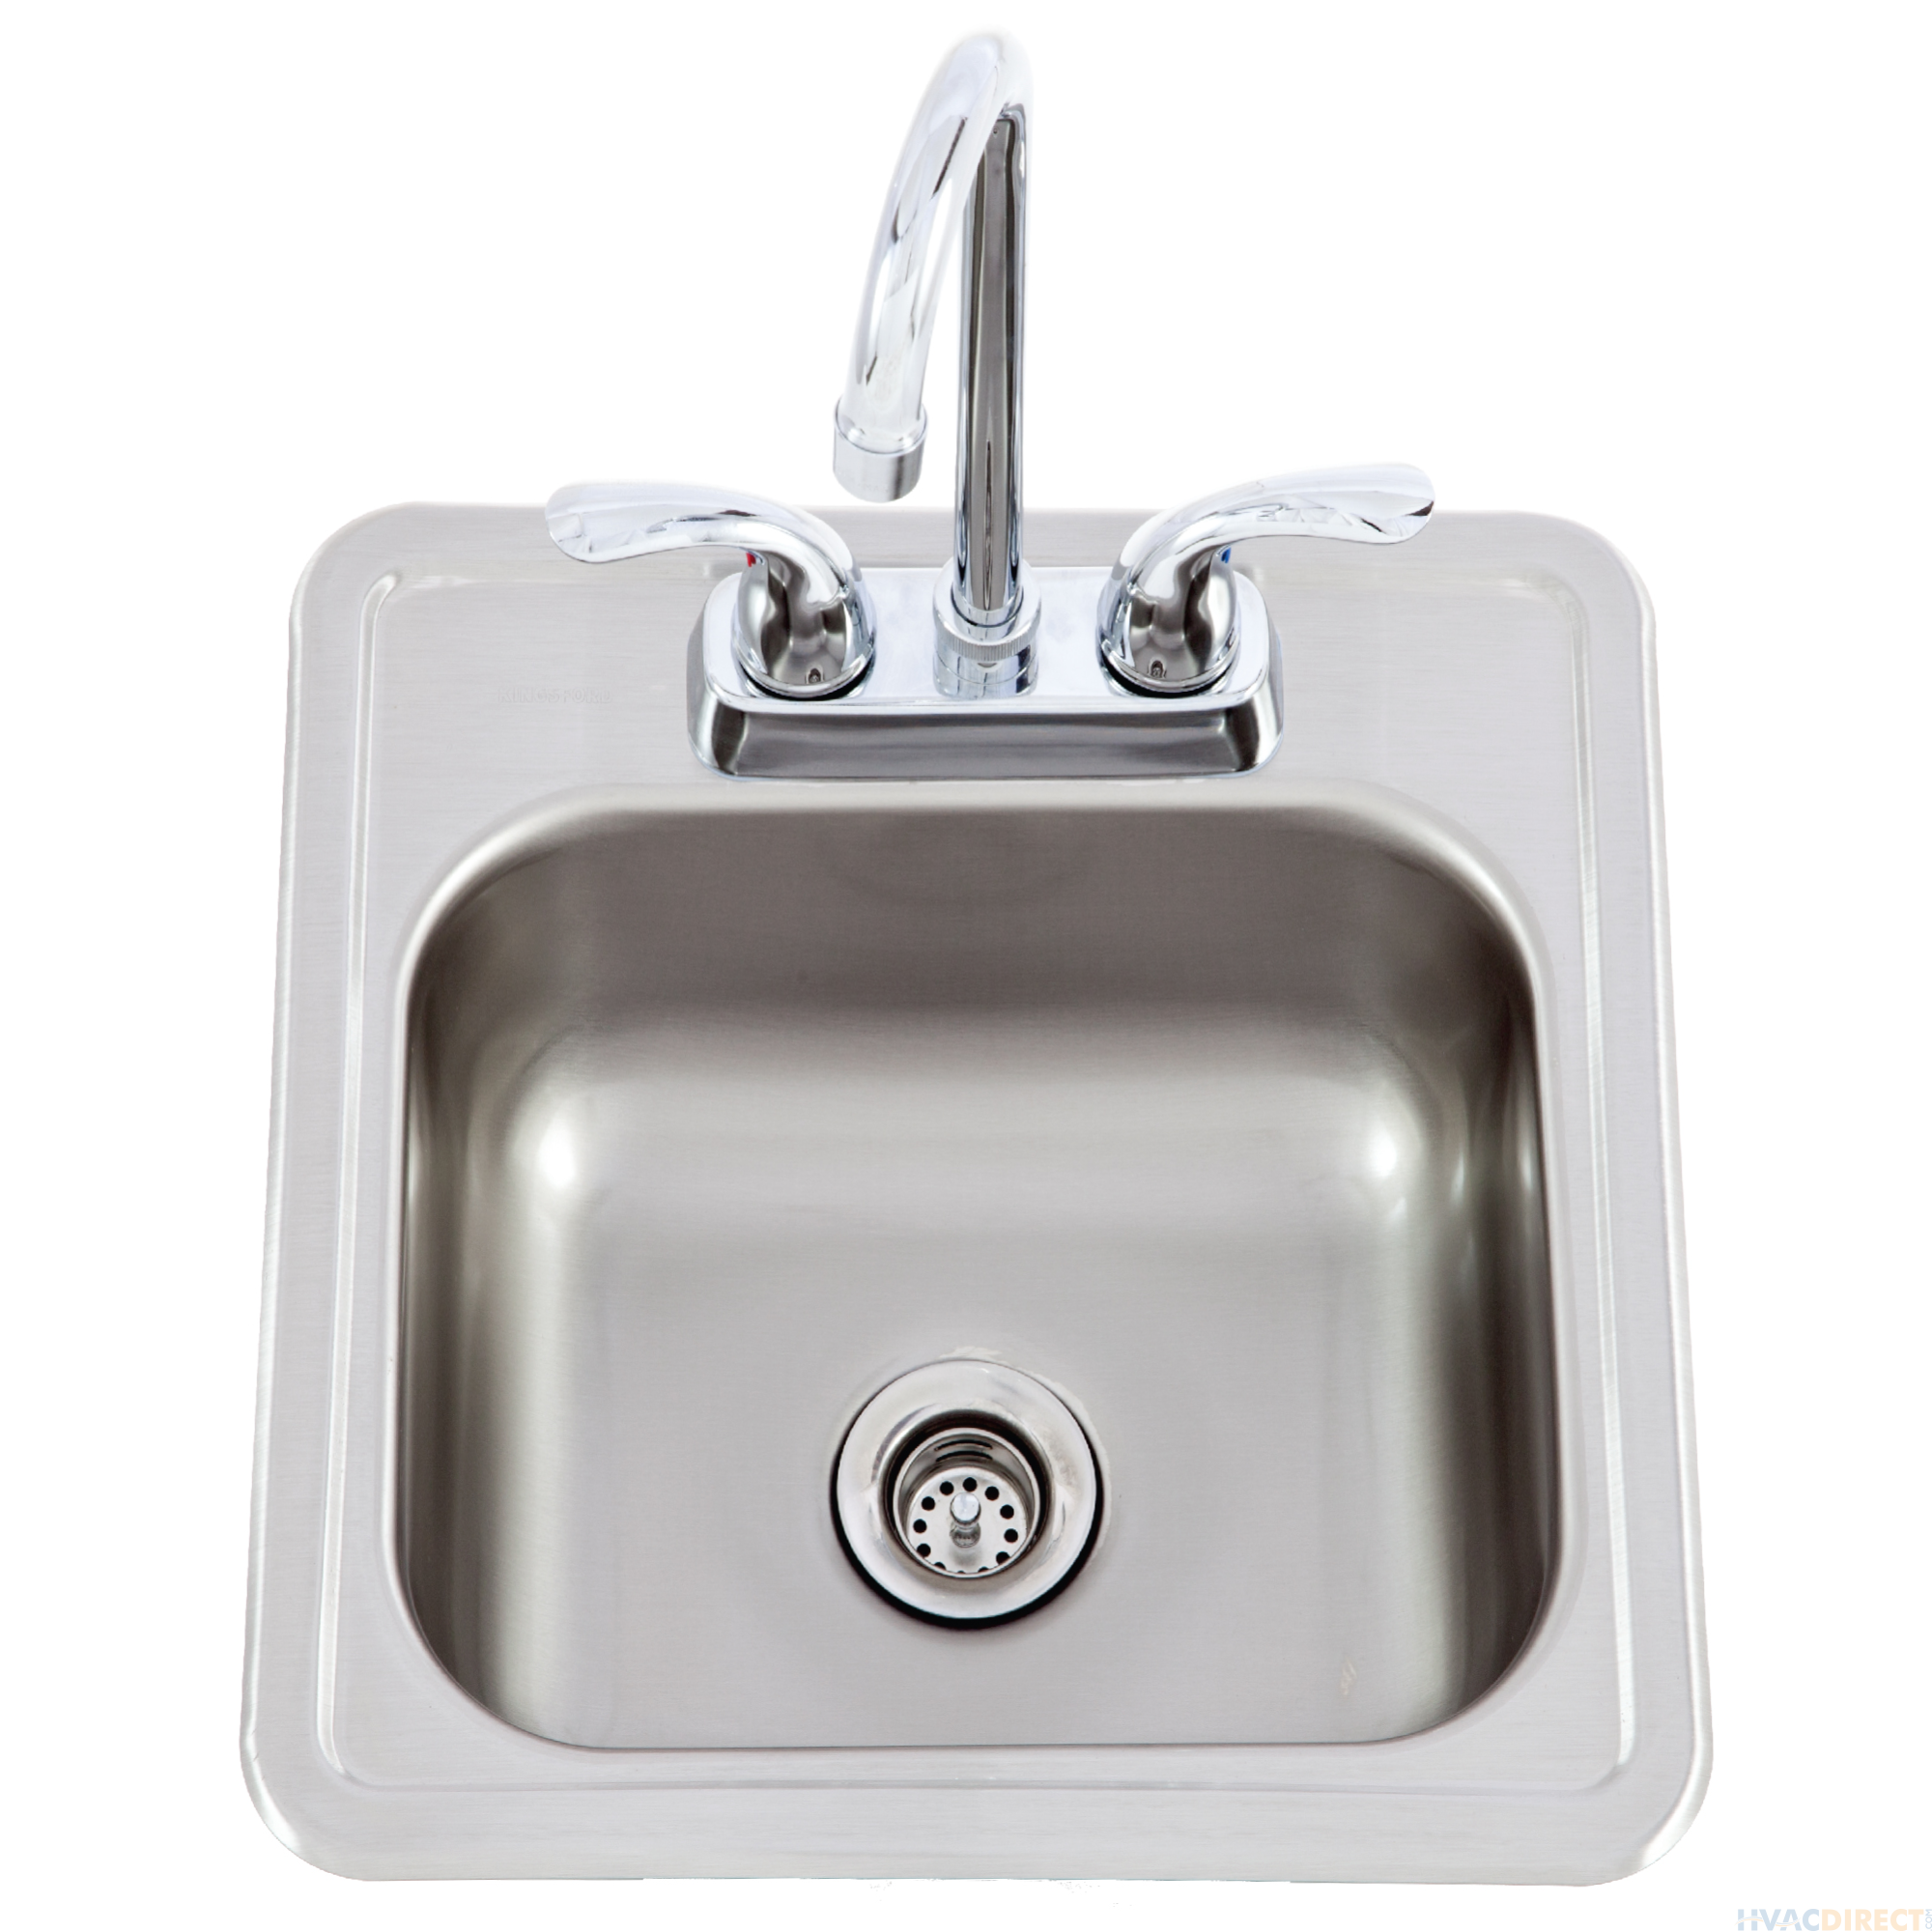 Lion 15 X 15 Outdoor Rated Stainless Steel Sink With Hot/Cold Faucet - 54167